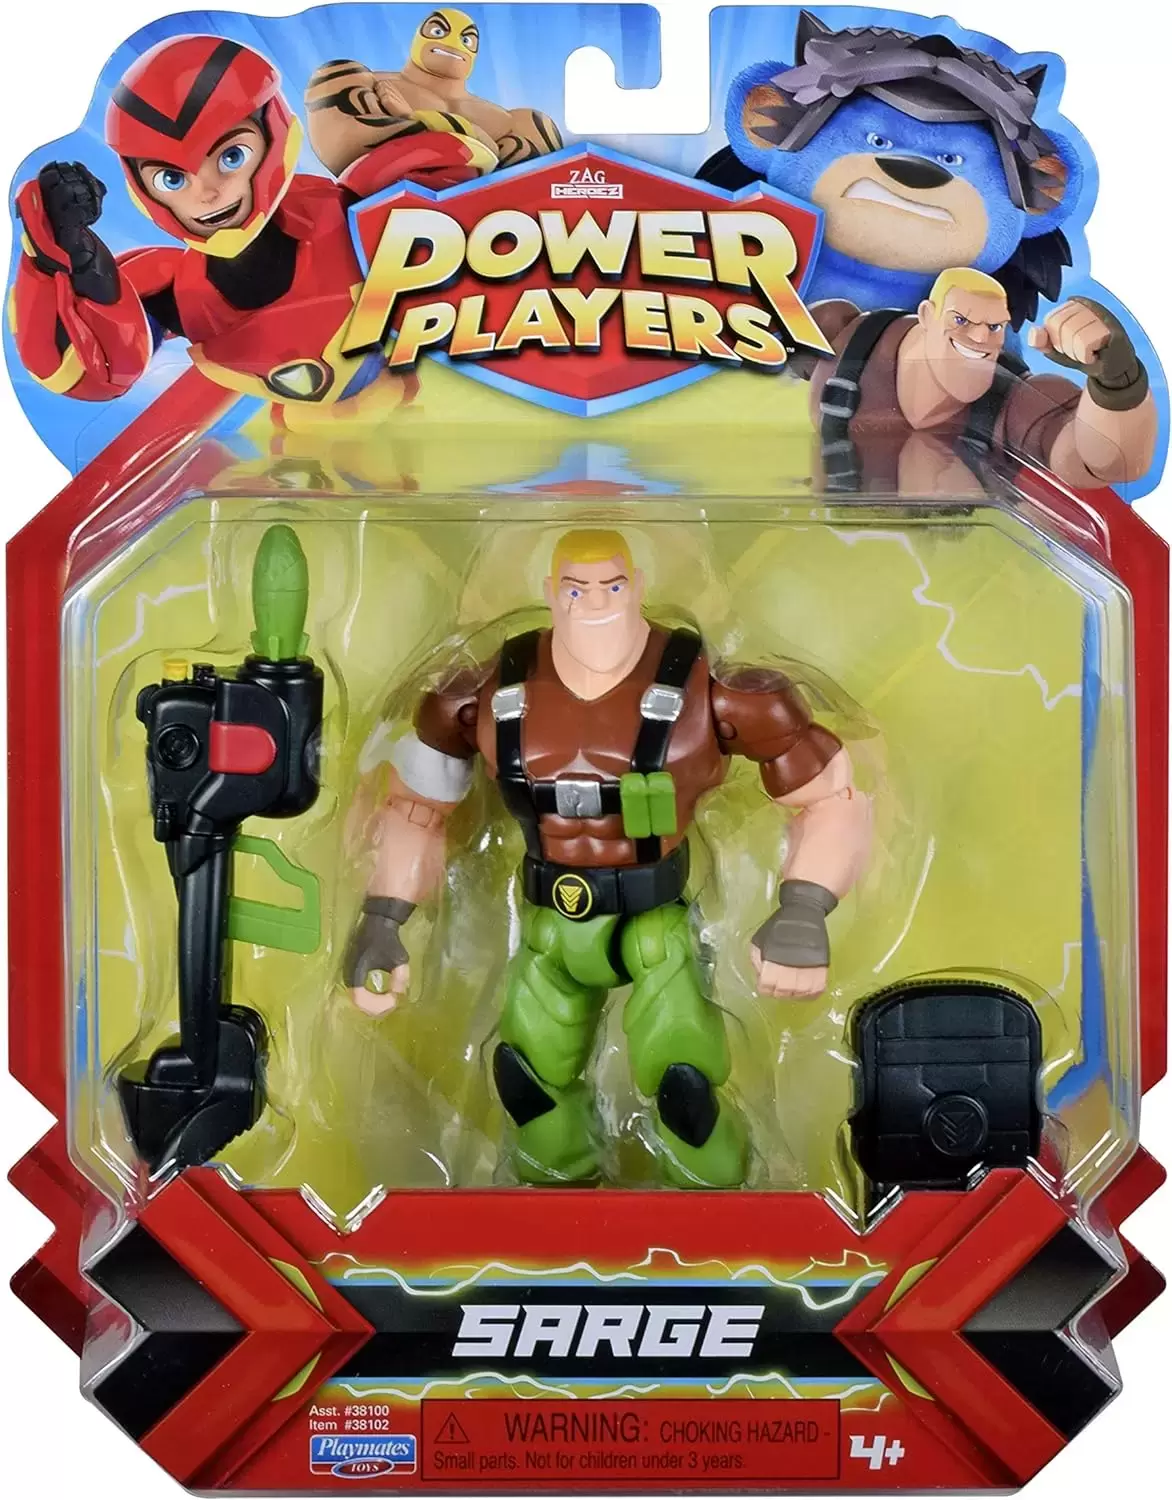 Power Players - Sarge